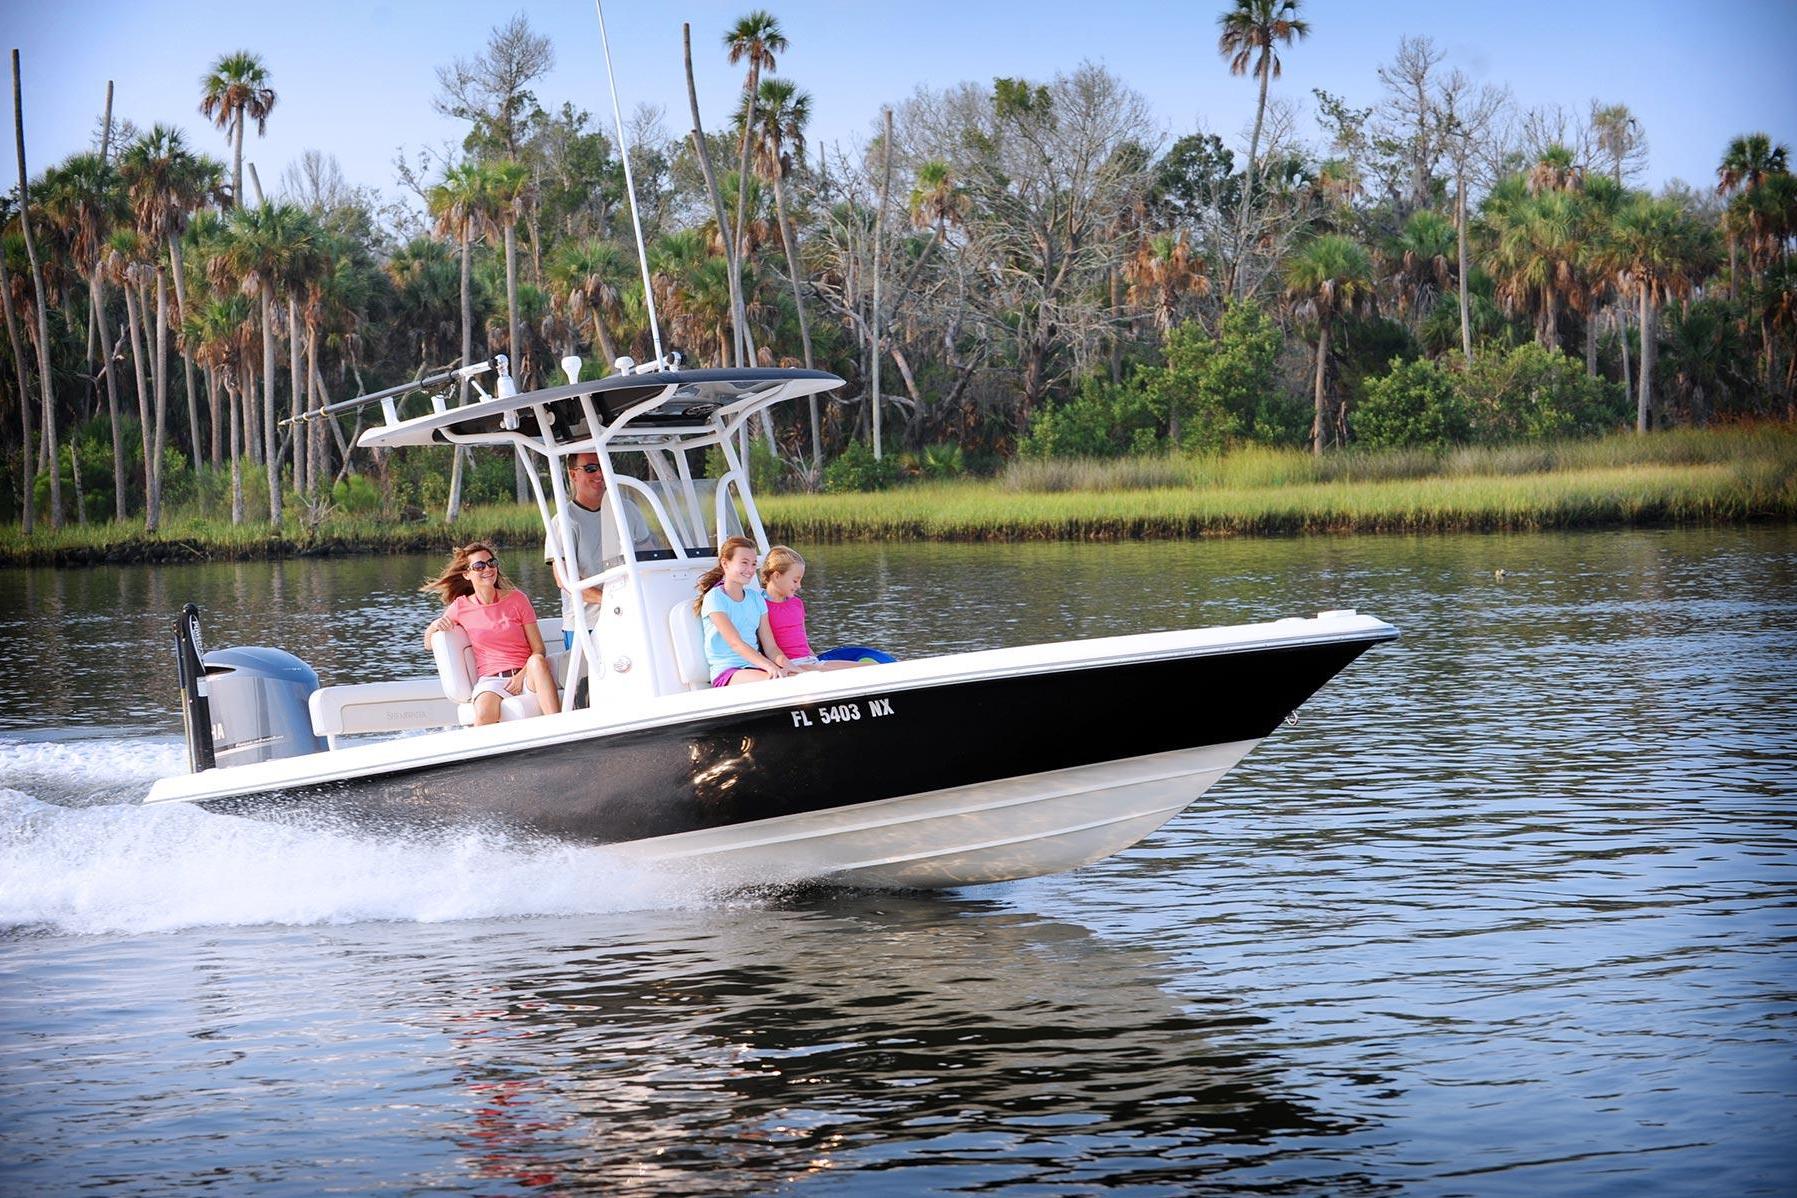 Water Activities in Crystal River, FL: Fishing, Scalloping